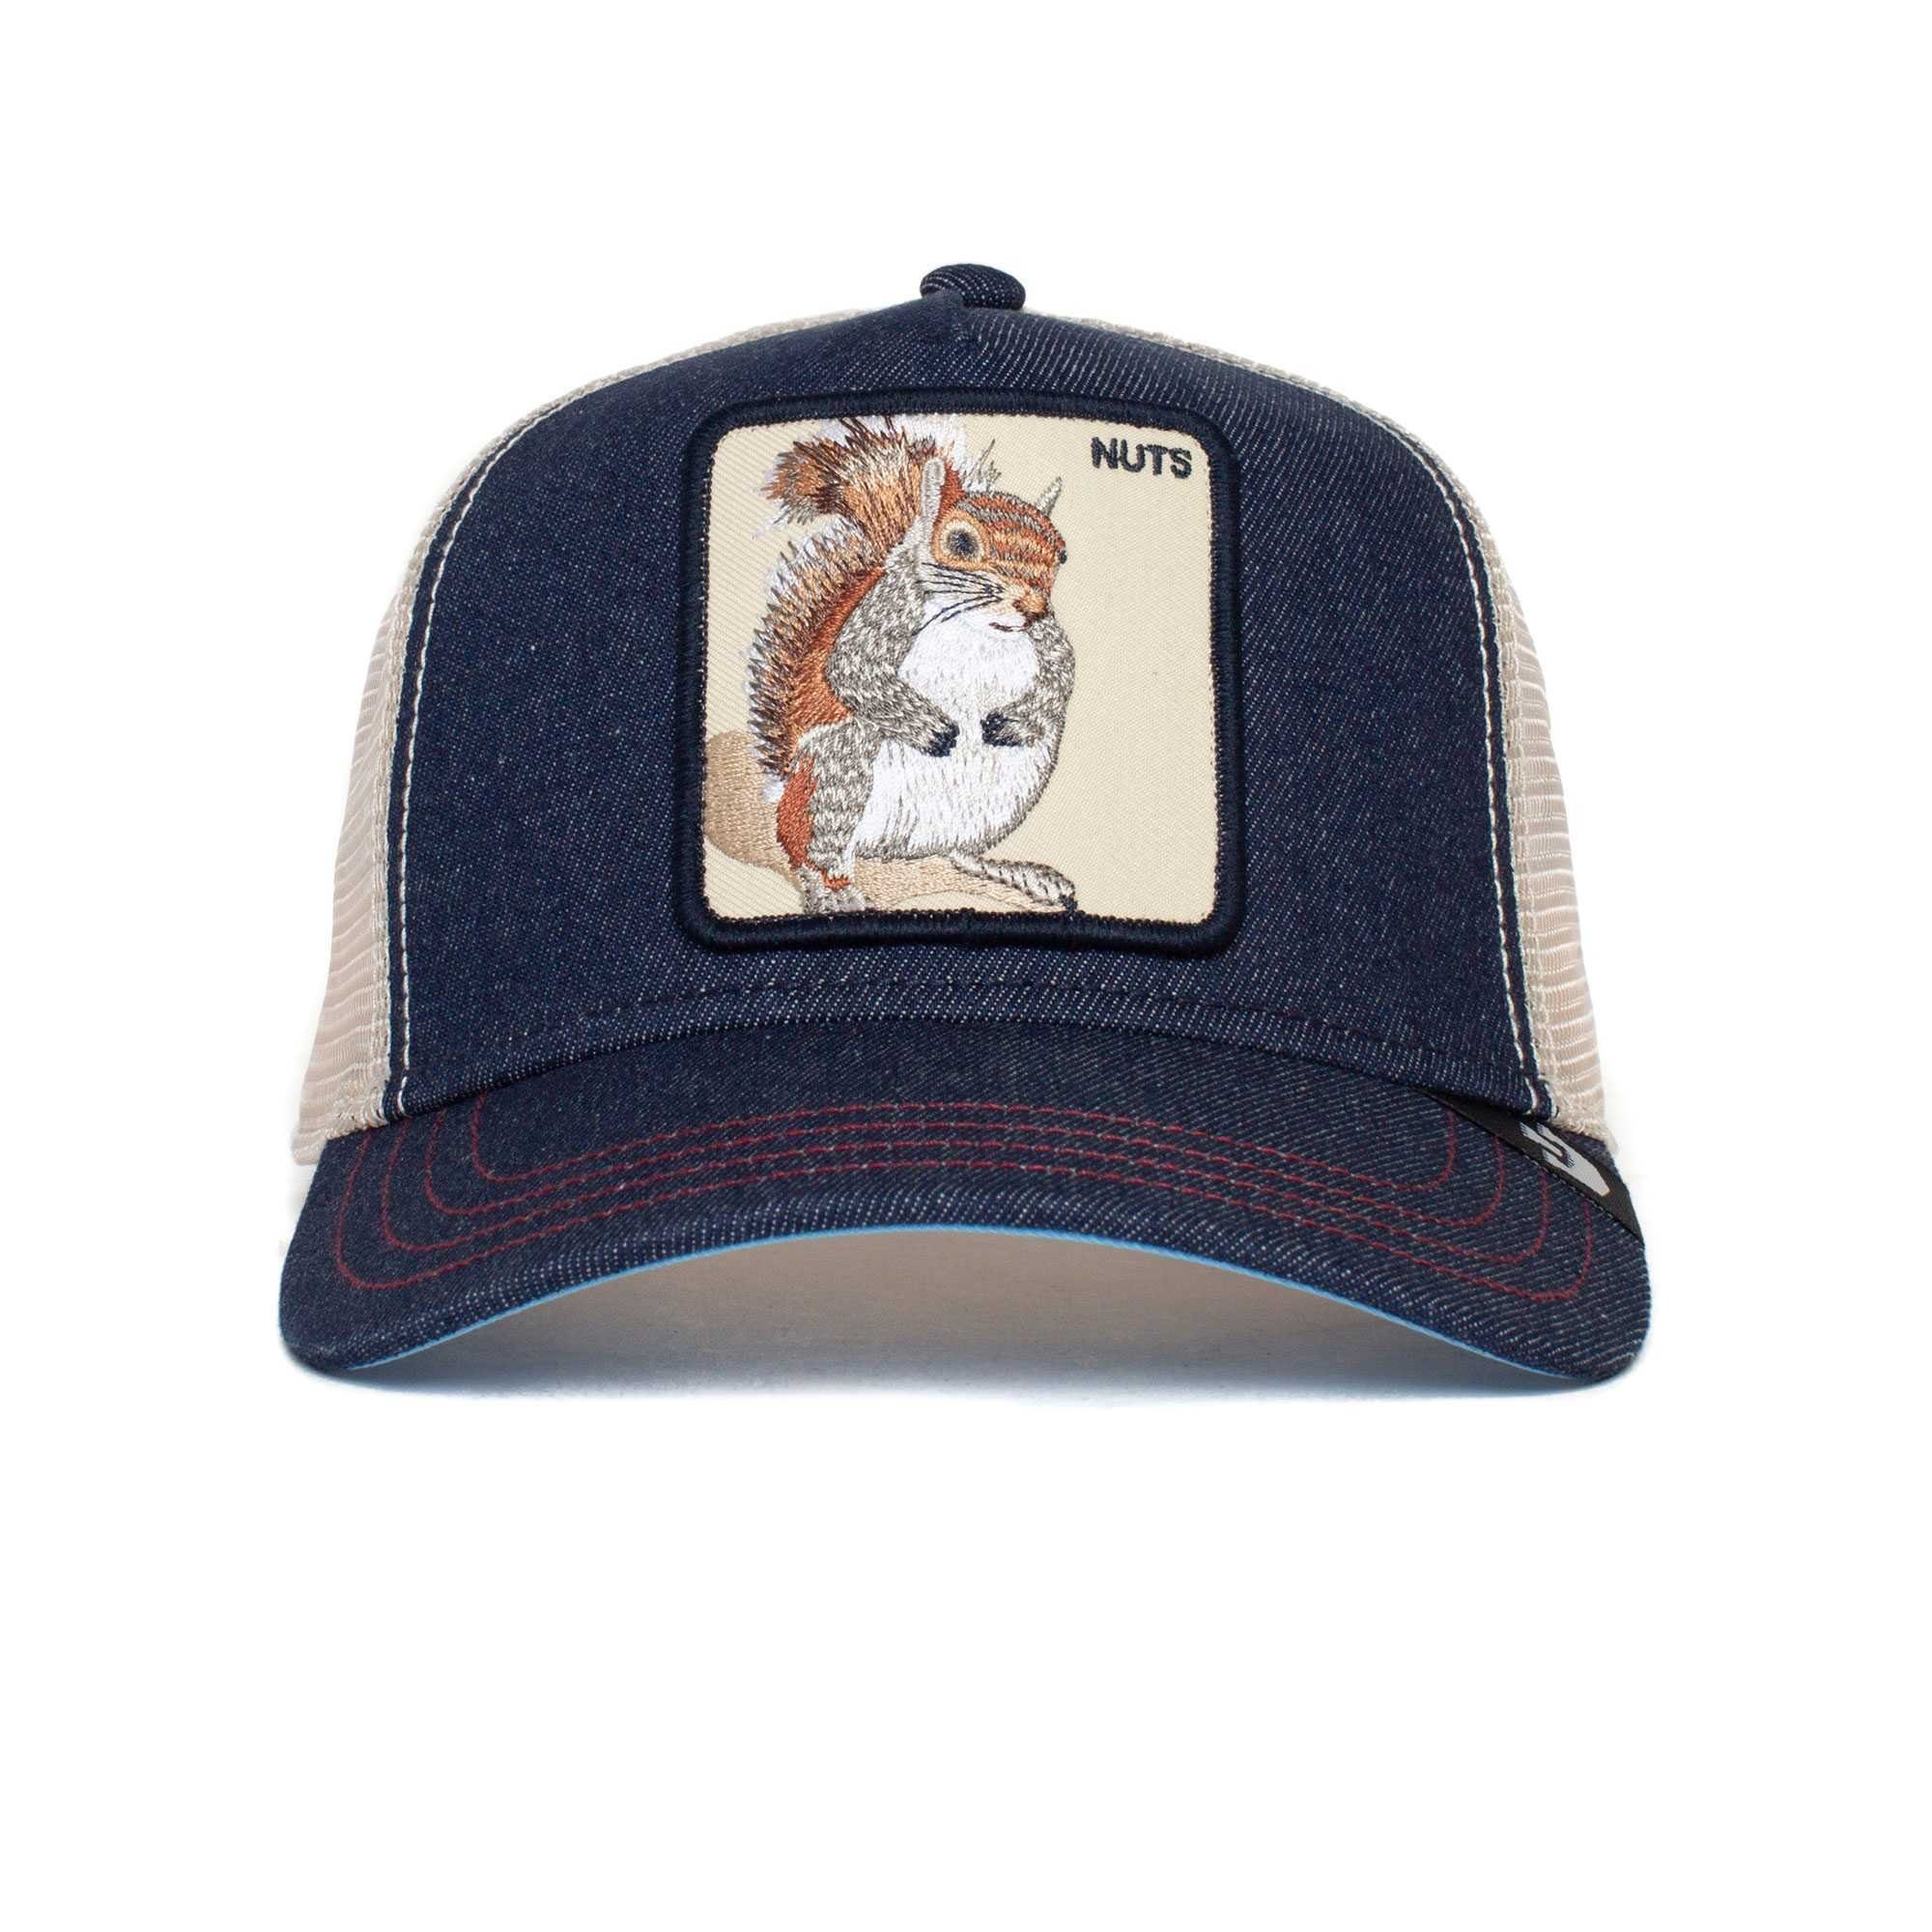 - Frontpatch, GOORIN Bros. Unisex Nuts One The Size Squirrel Trucker Kappe, Cap Baseball Cap